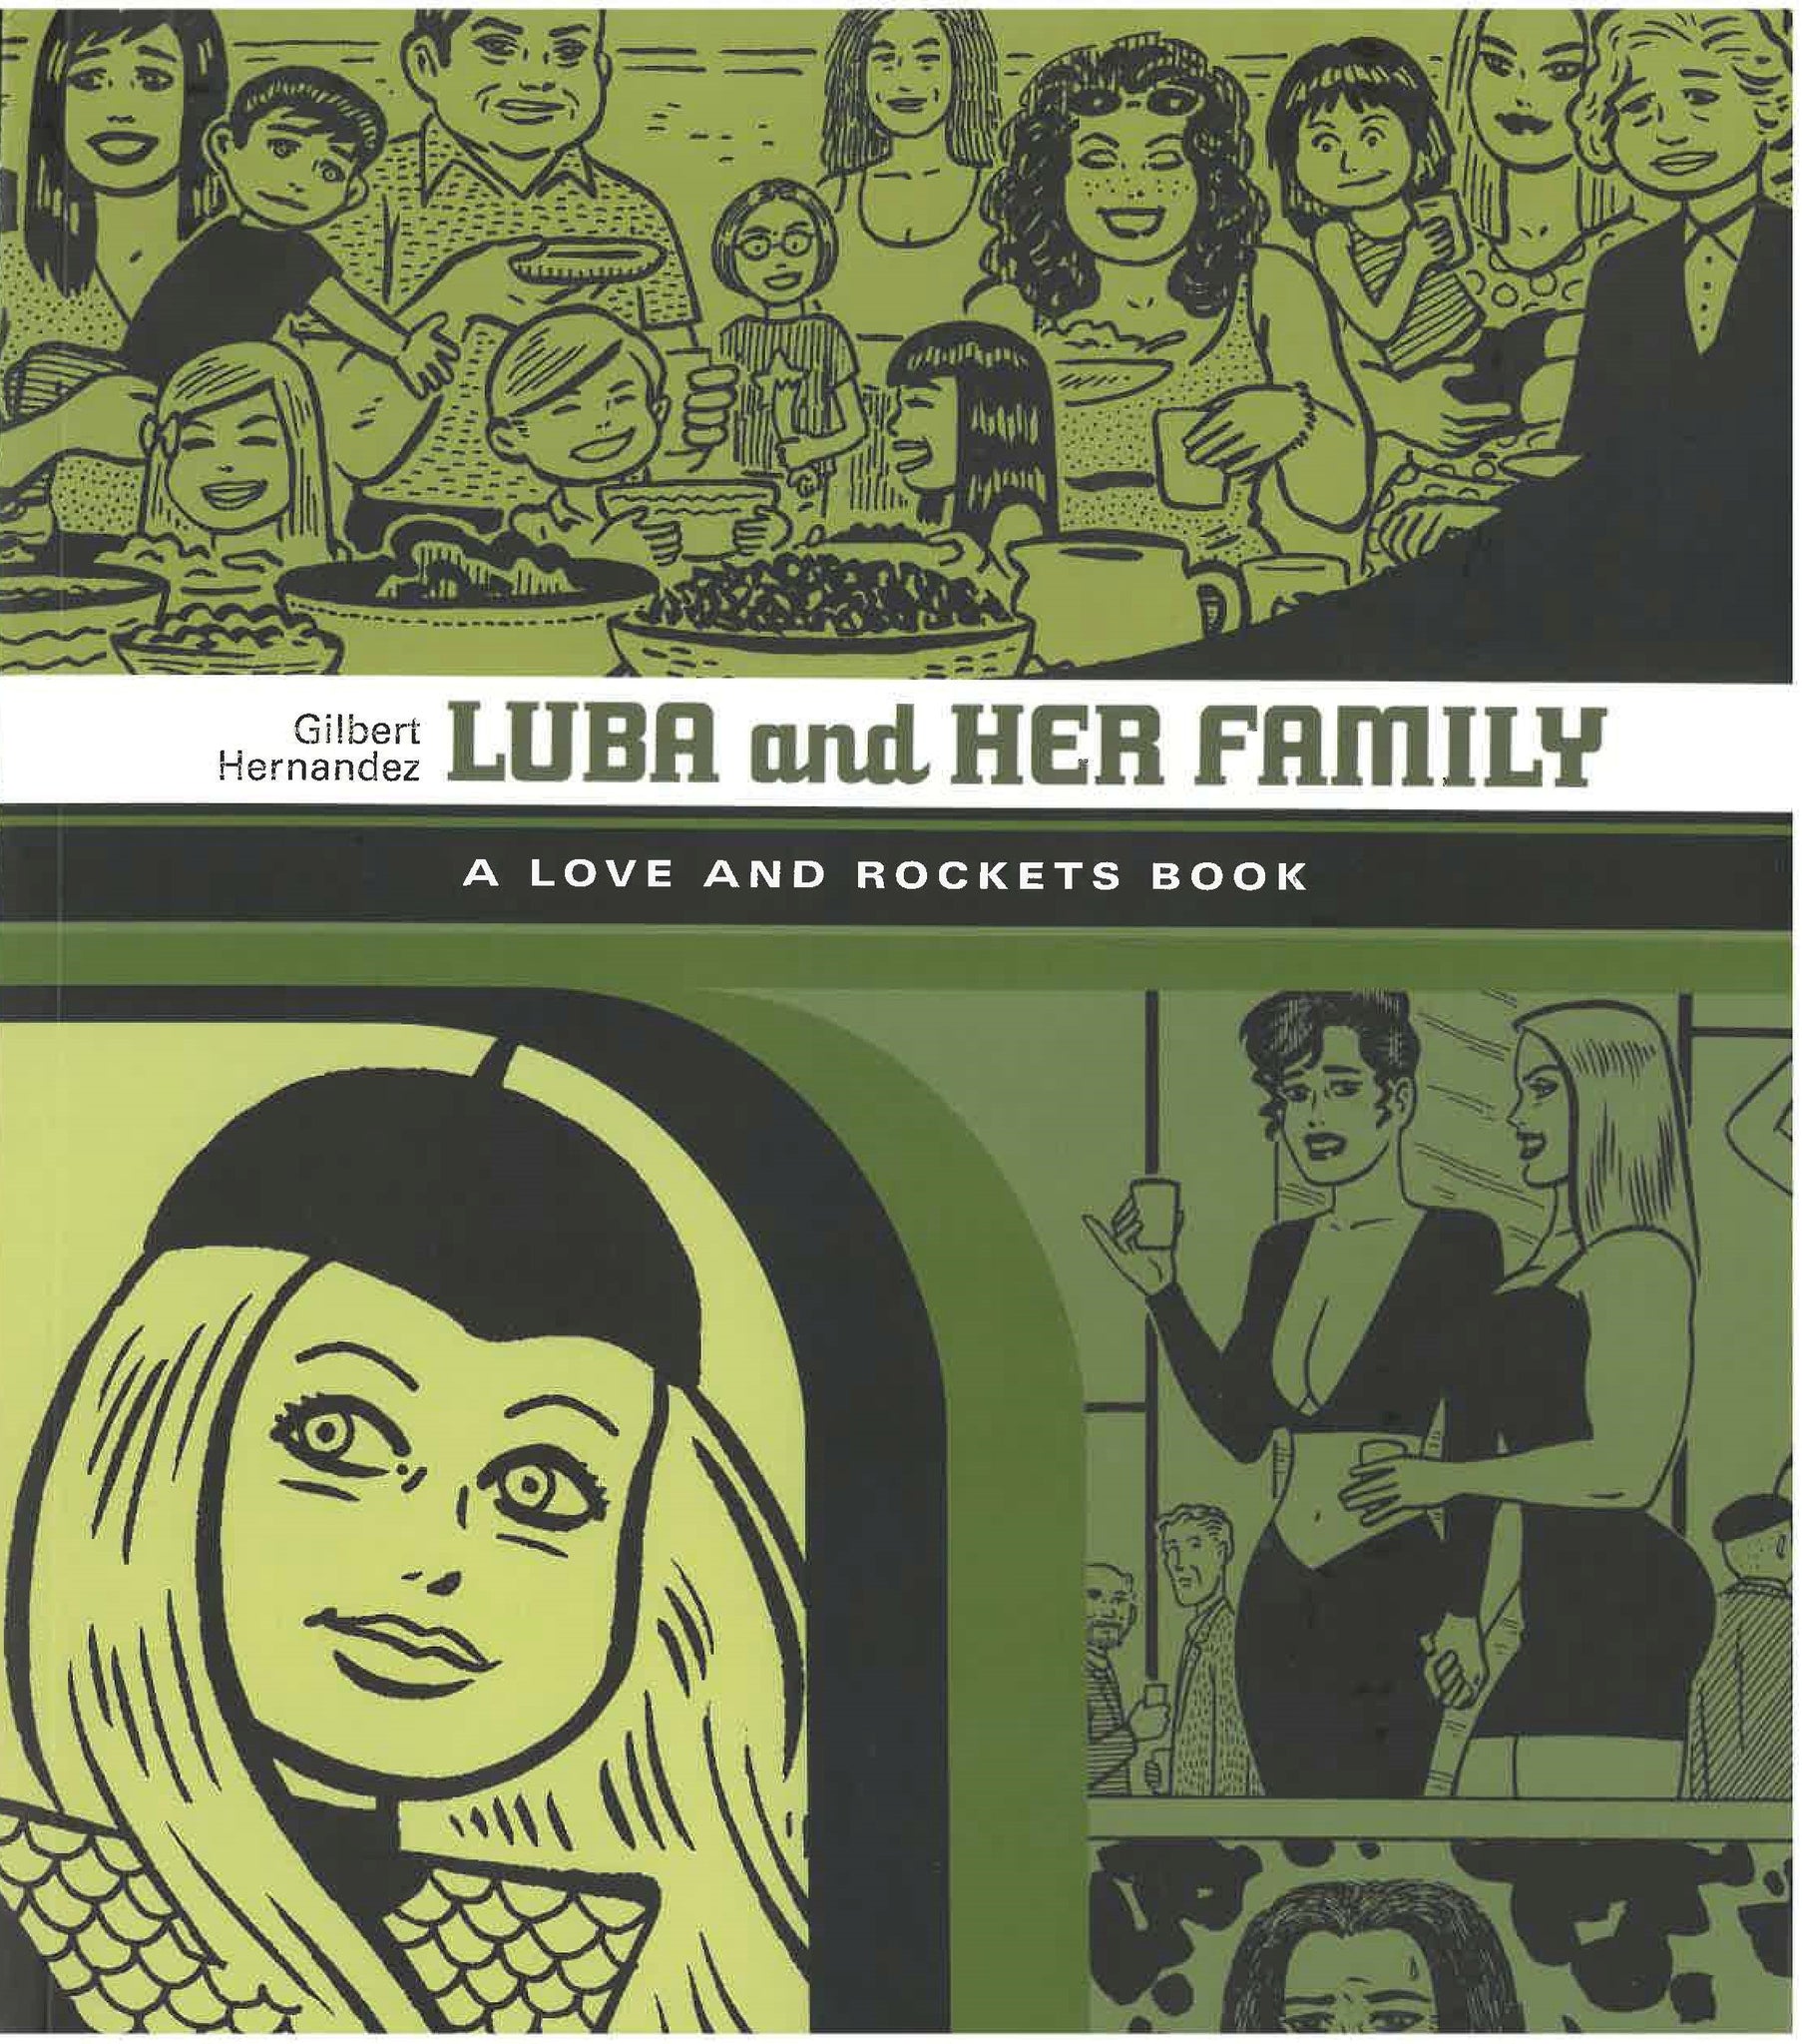 Luba and Her Family: A Love and Rockets Book by Gilbert Hernandez